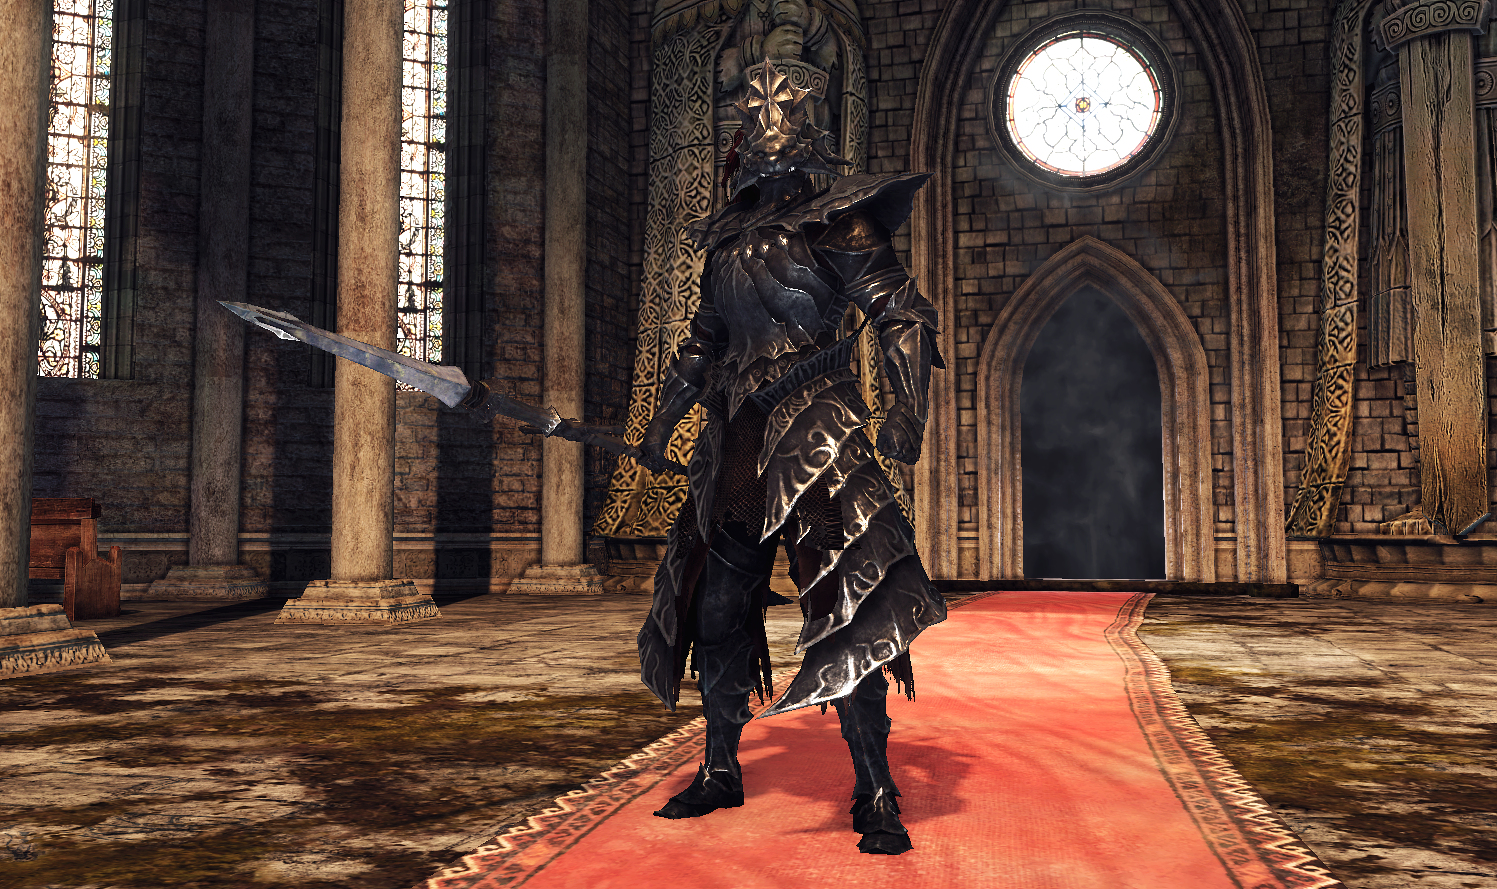 He greatly resembles Dragonslayer Ornstein who guarded the Cathedral in Ano...